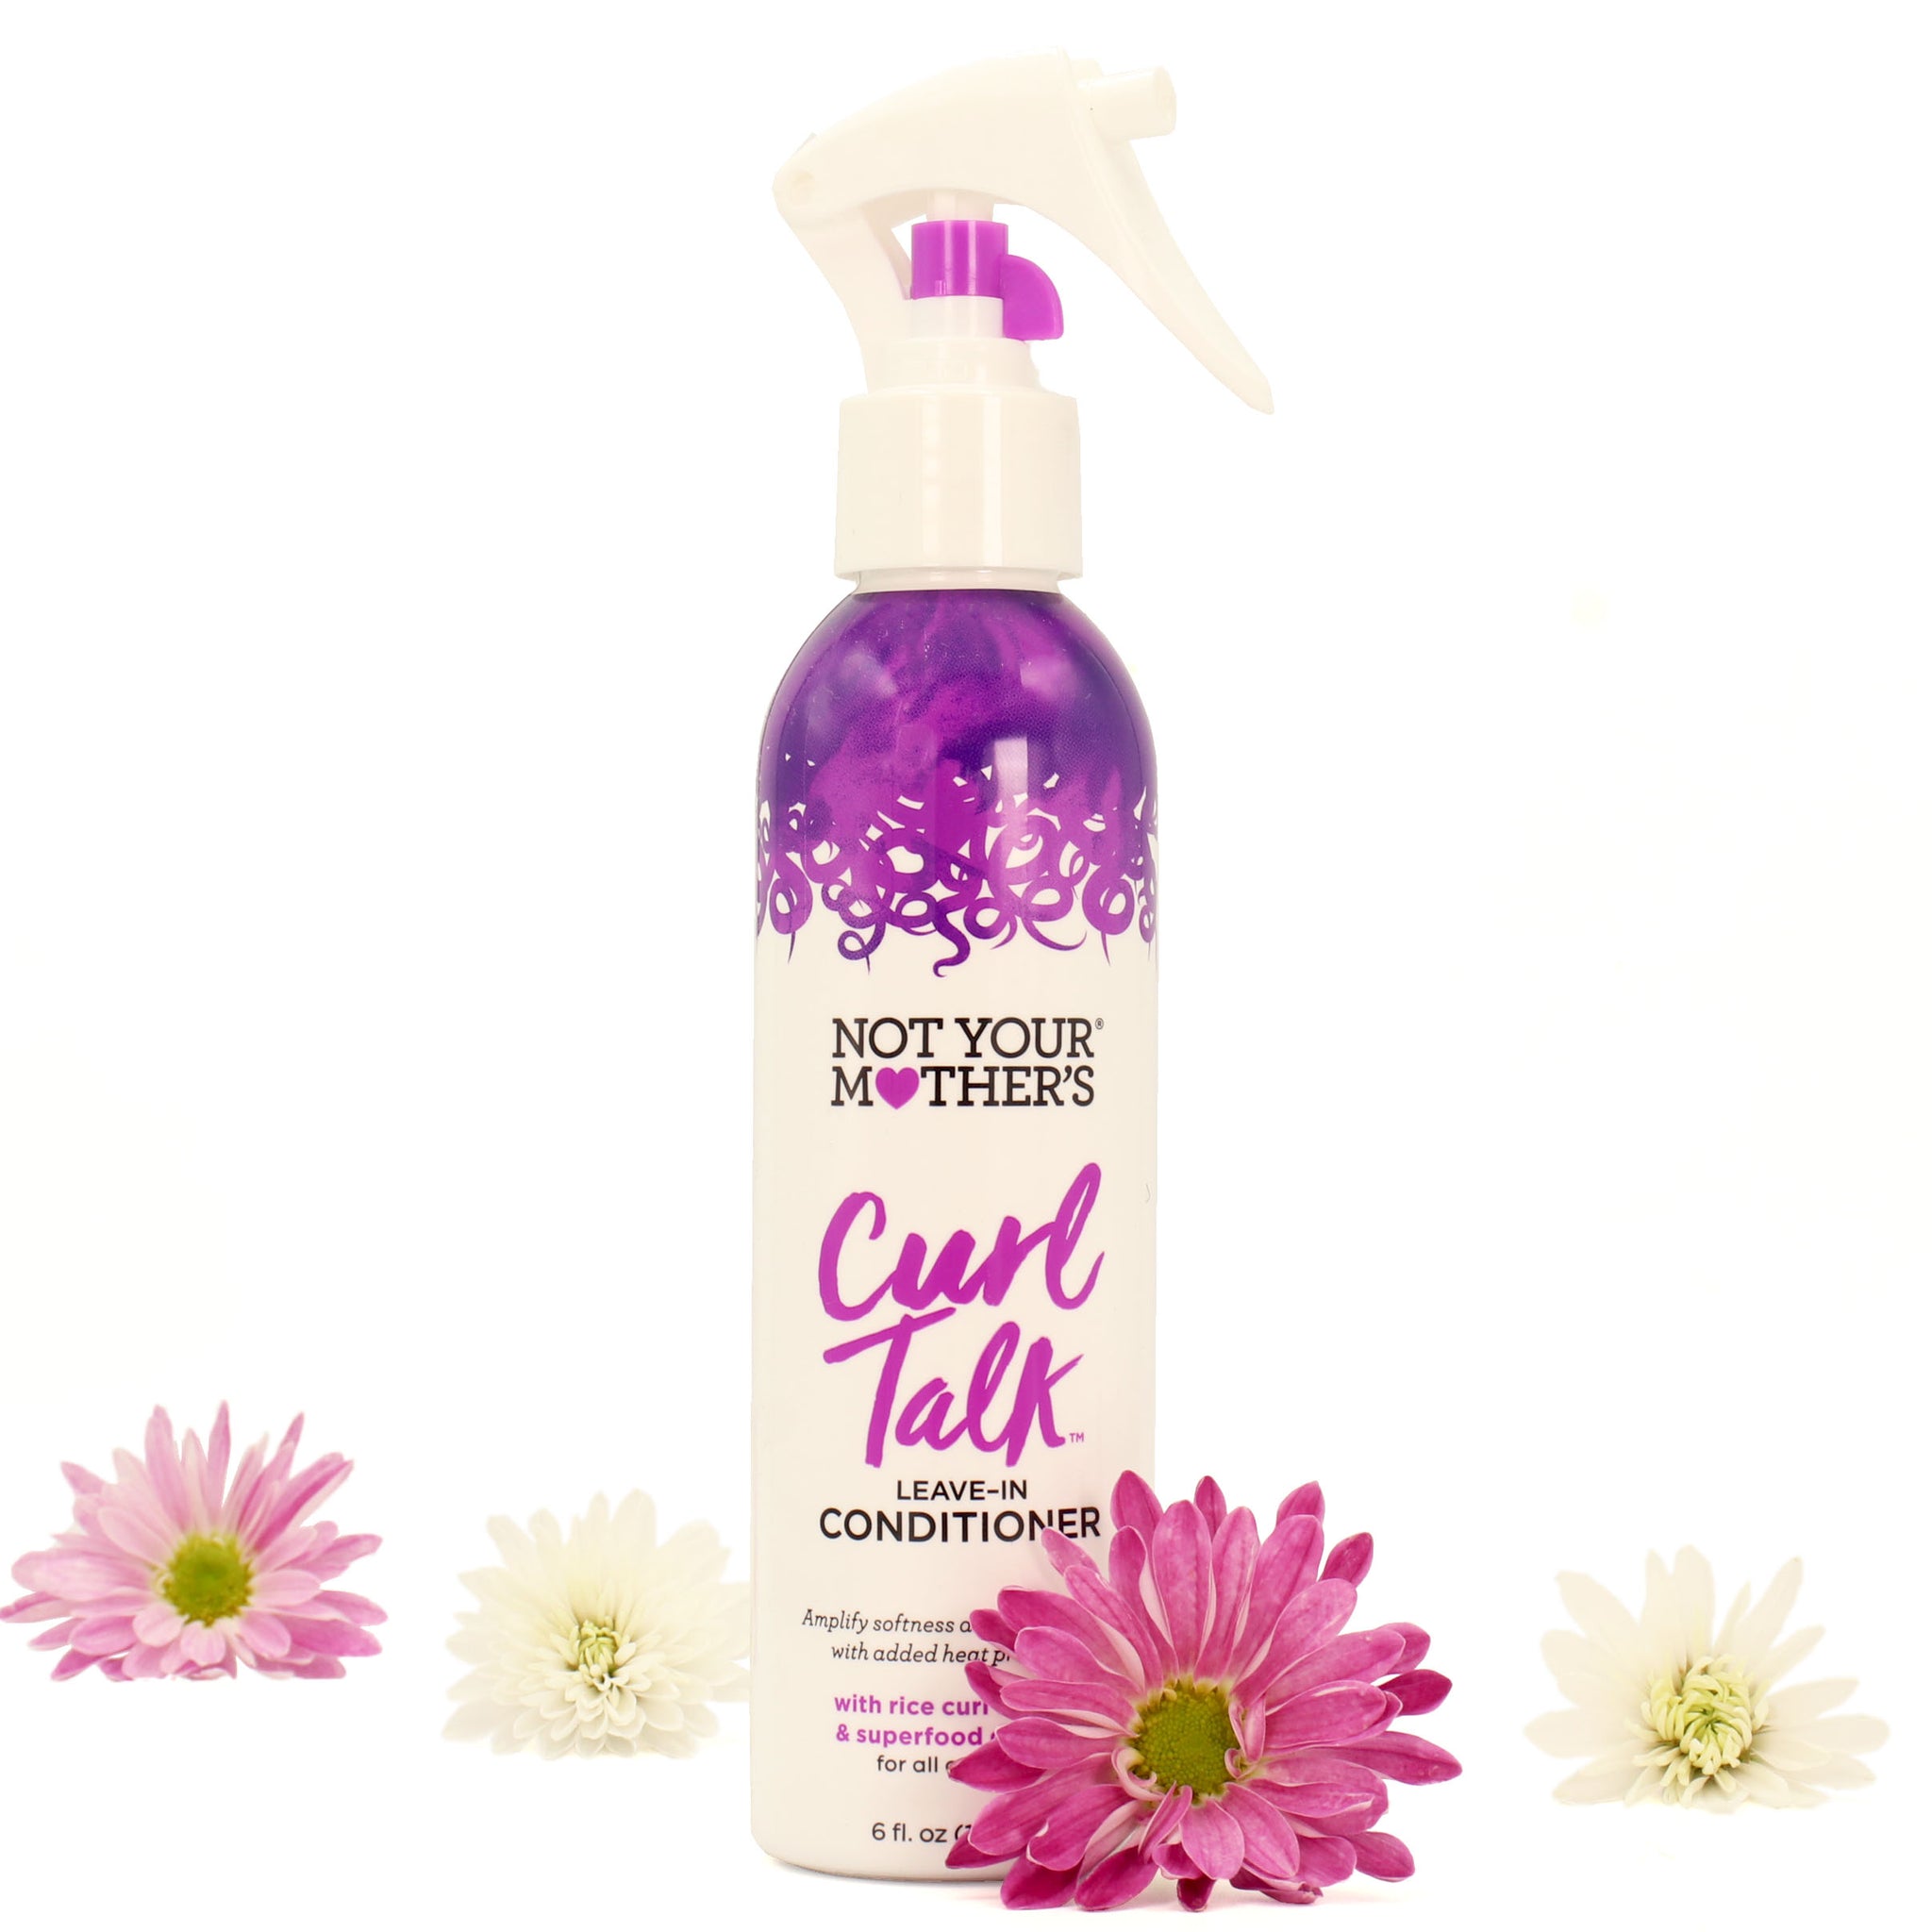 CURL TALK LEAVE-IN CONDITIONER NOT YOUR MOTHER’S